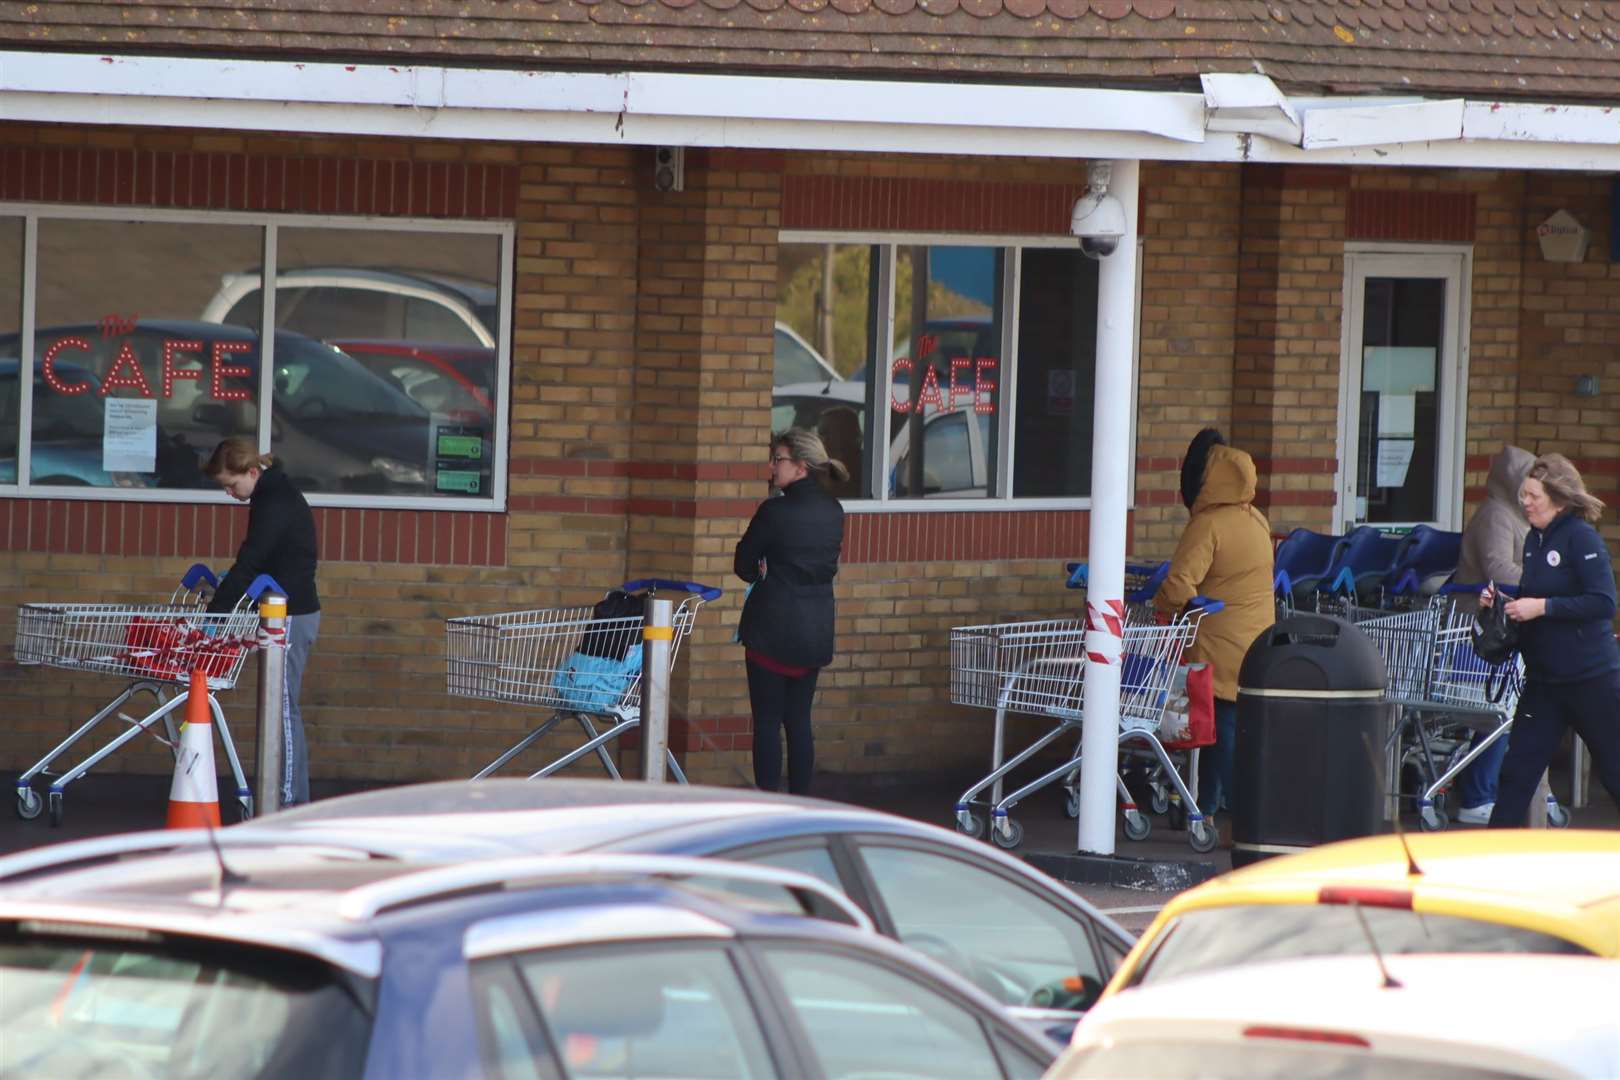 NHS workers queuing two metres apart outside Tesco because of the coronavirus scare